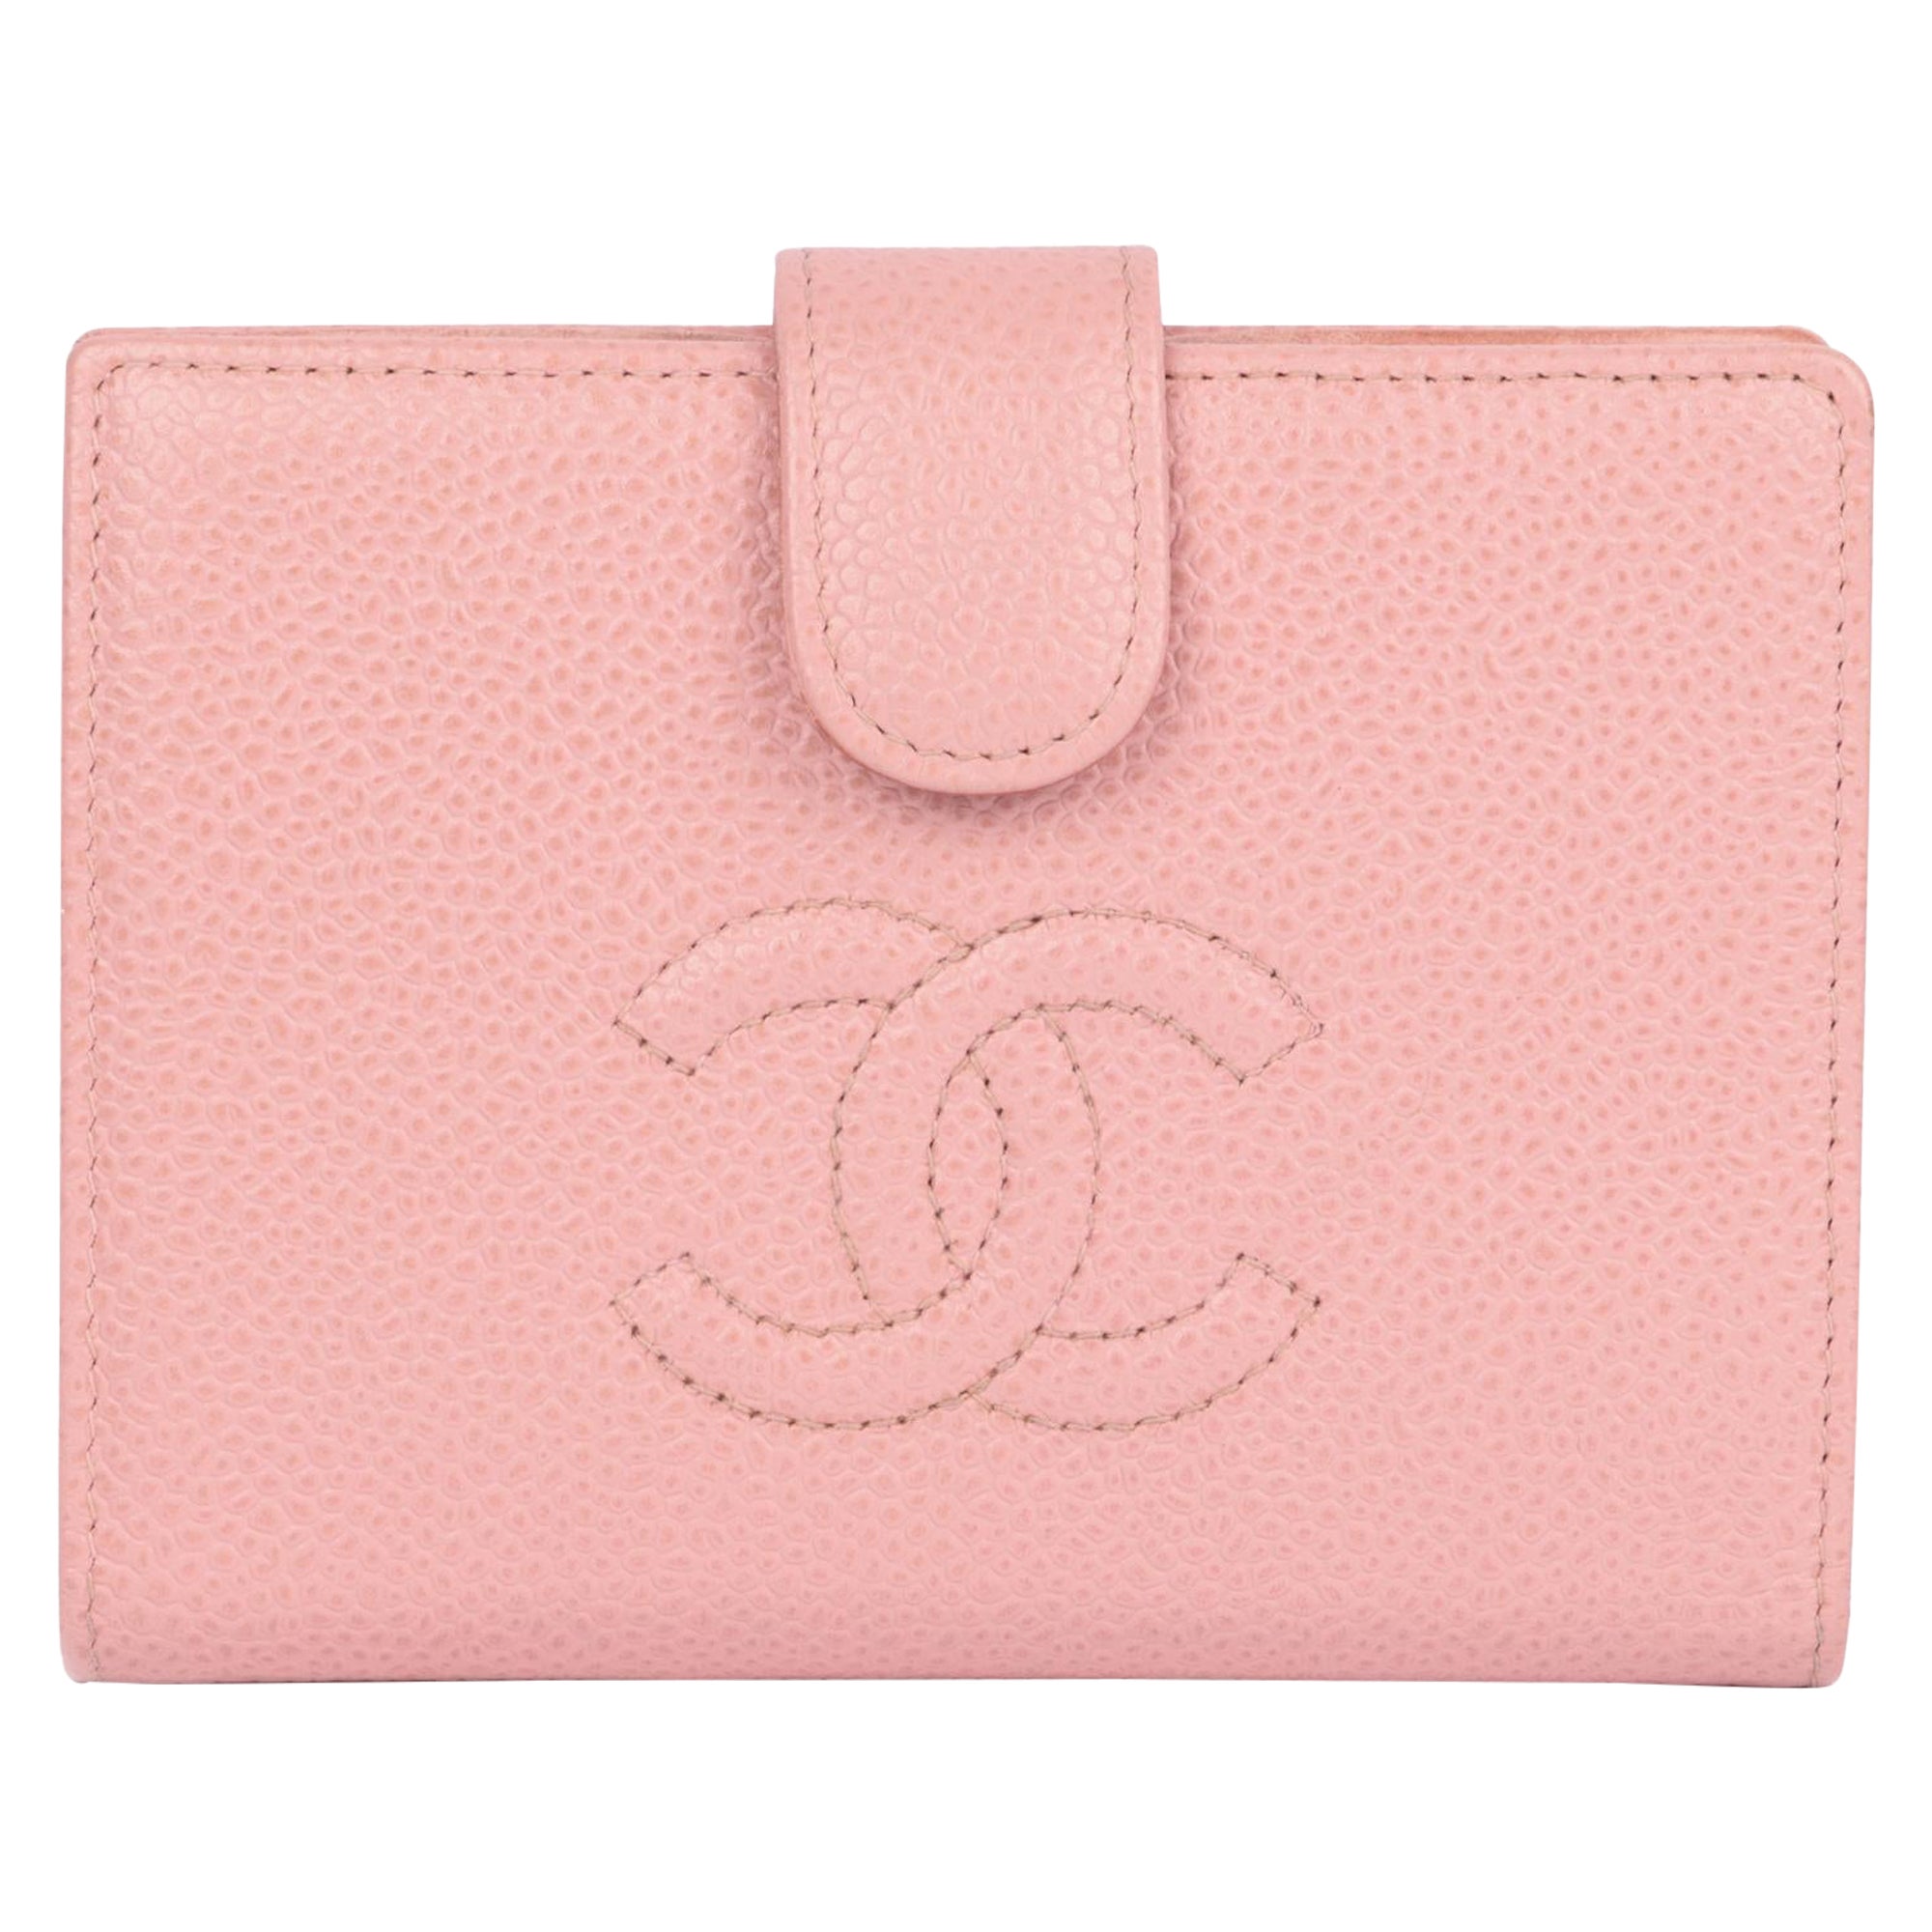 Authenticated Used CHANEL Chanel CC Filigree Zip Wallet Coco Mark